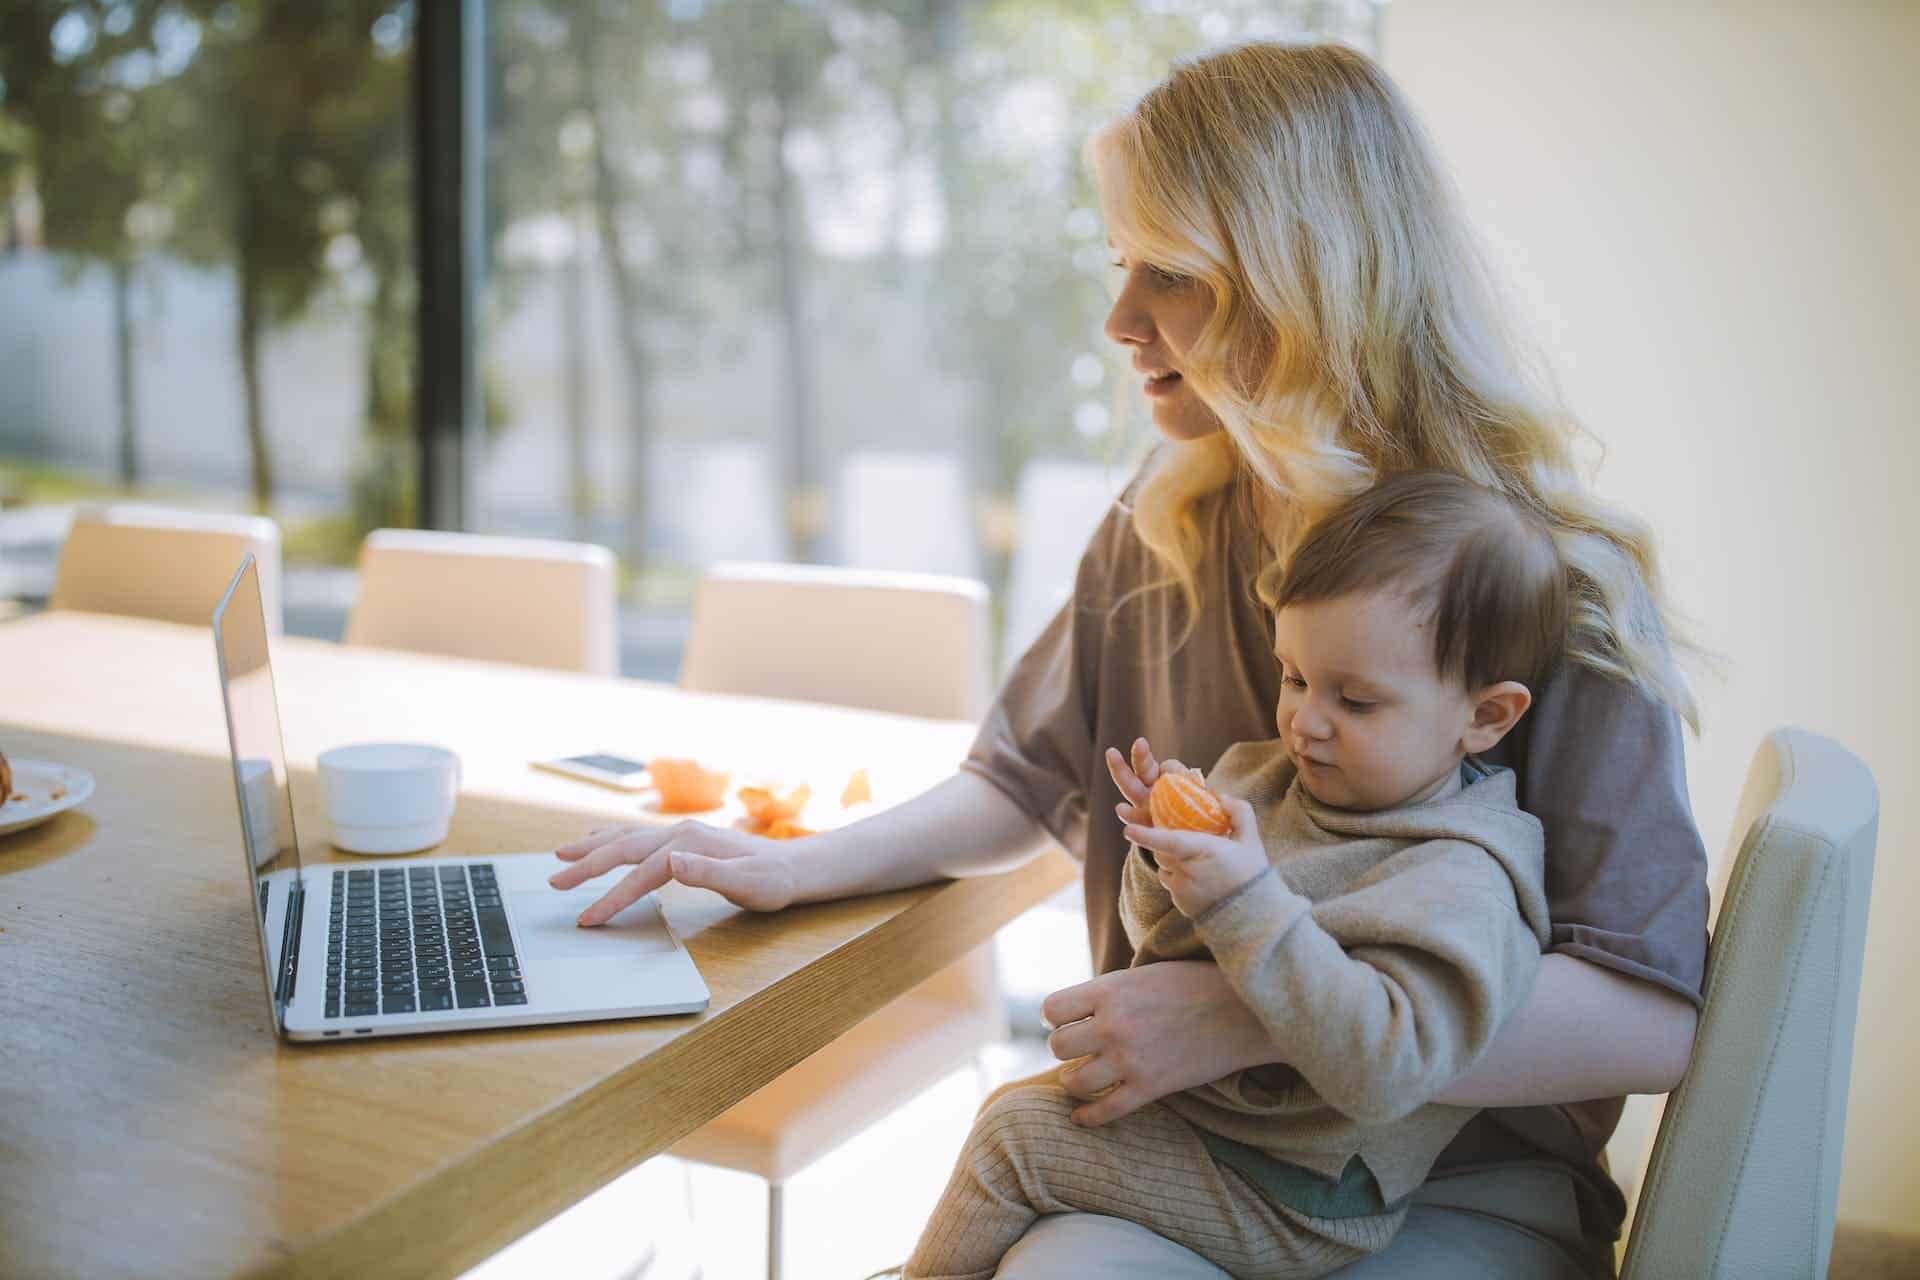 Blonde mother multitasking with work on her laptop while holding her young son, who is enjoying a tangerine